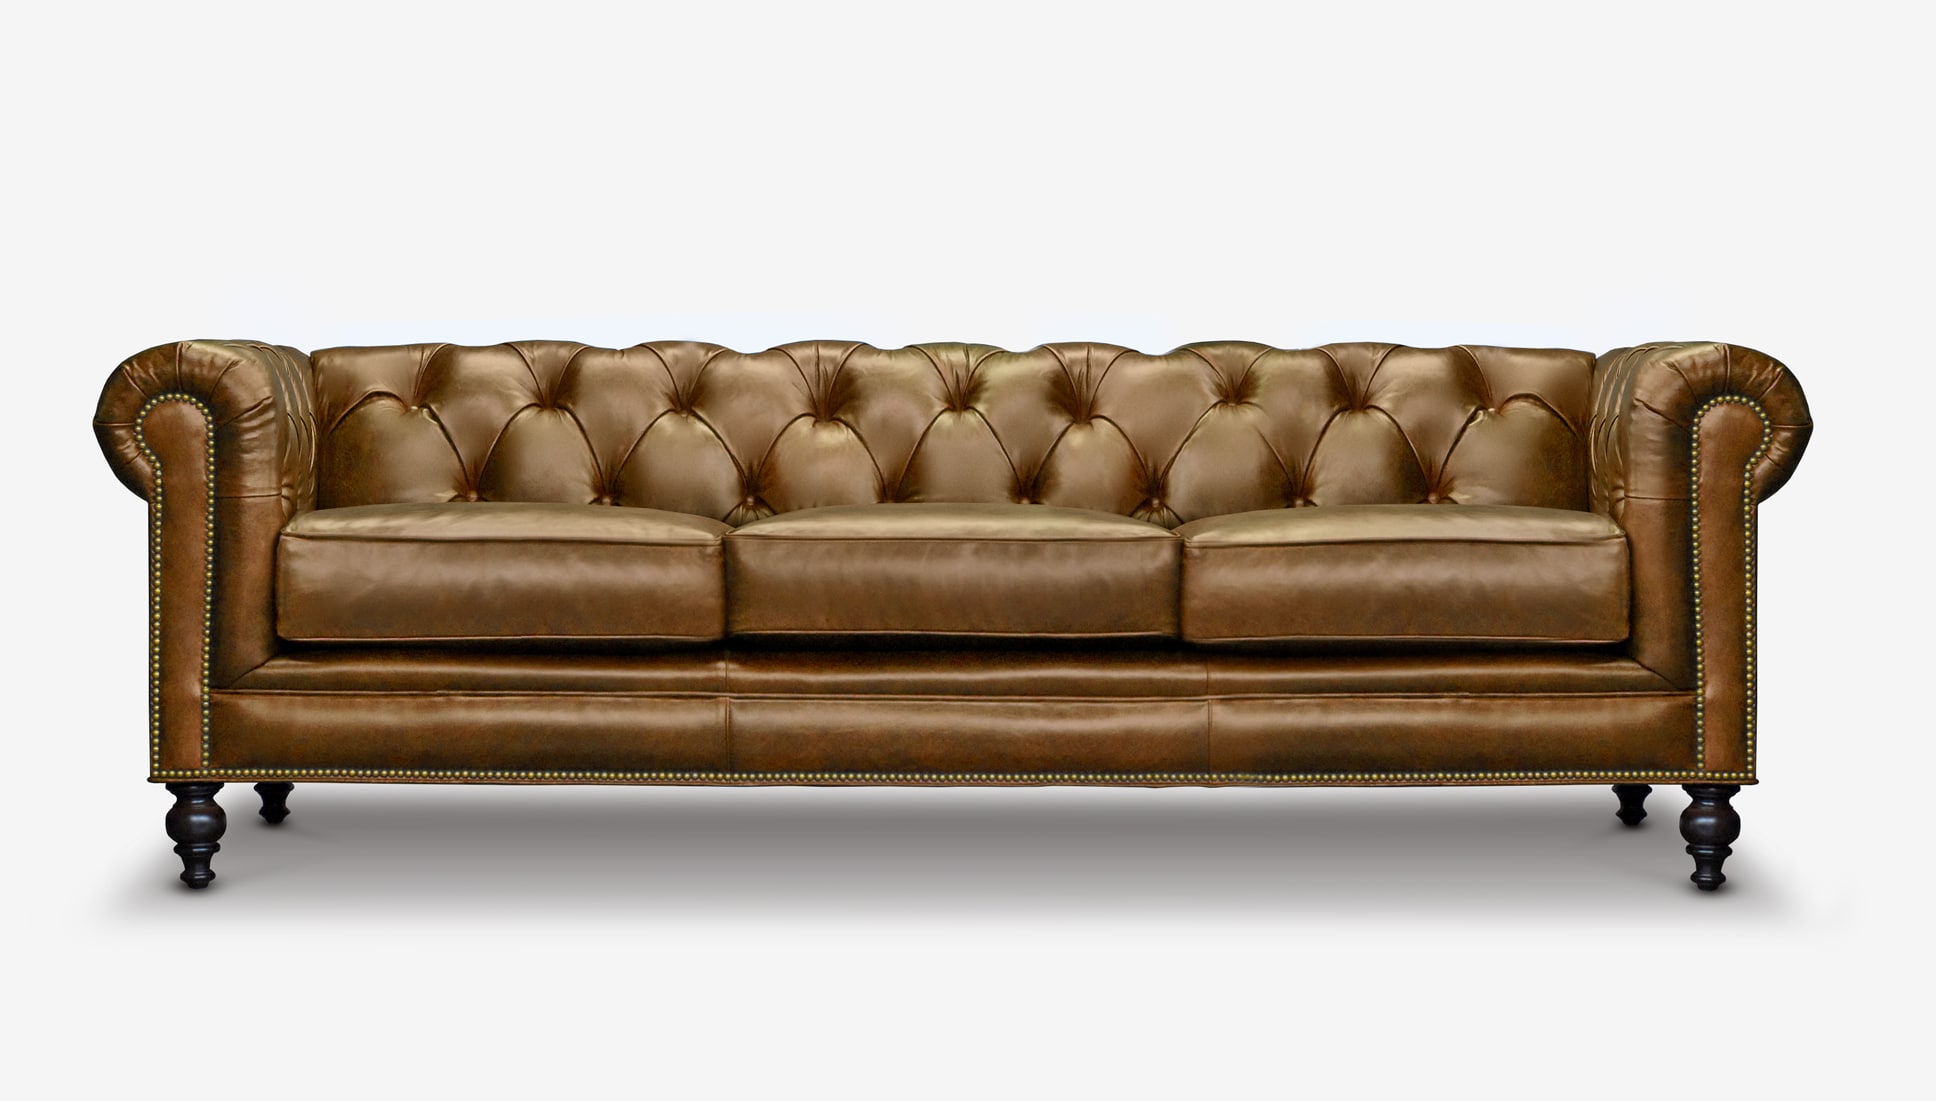 Swift-Ship'd Fitzgerald: Express Delivery Whiskey Brown Leather Chesterfield Sofa